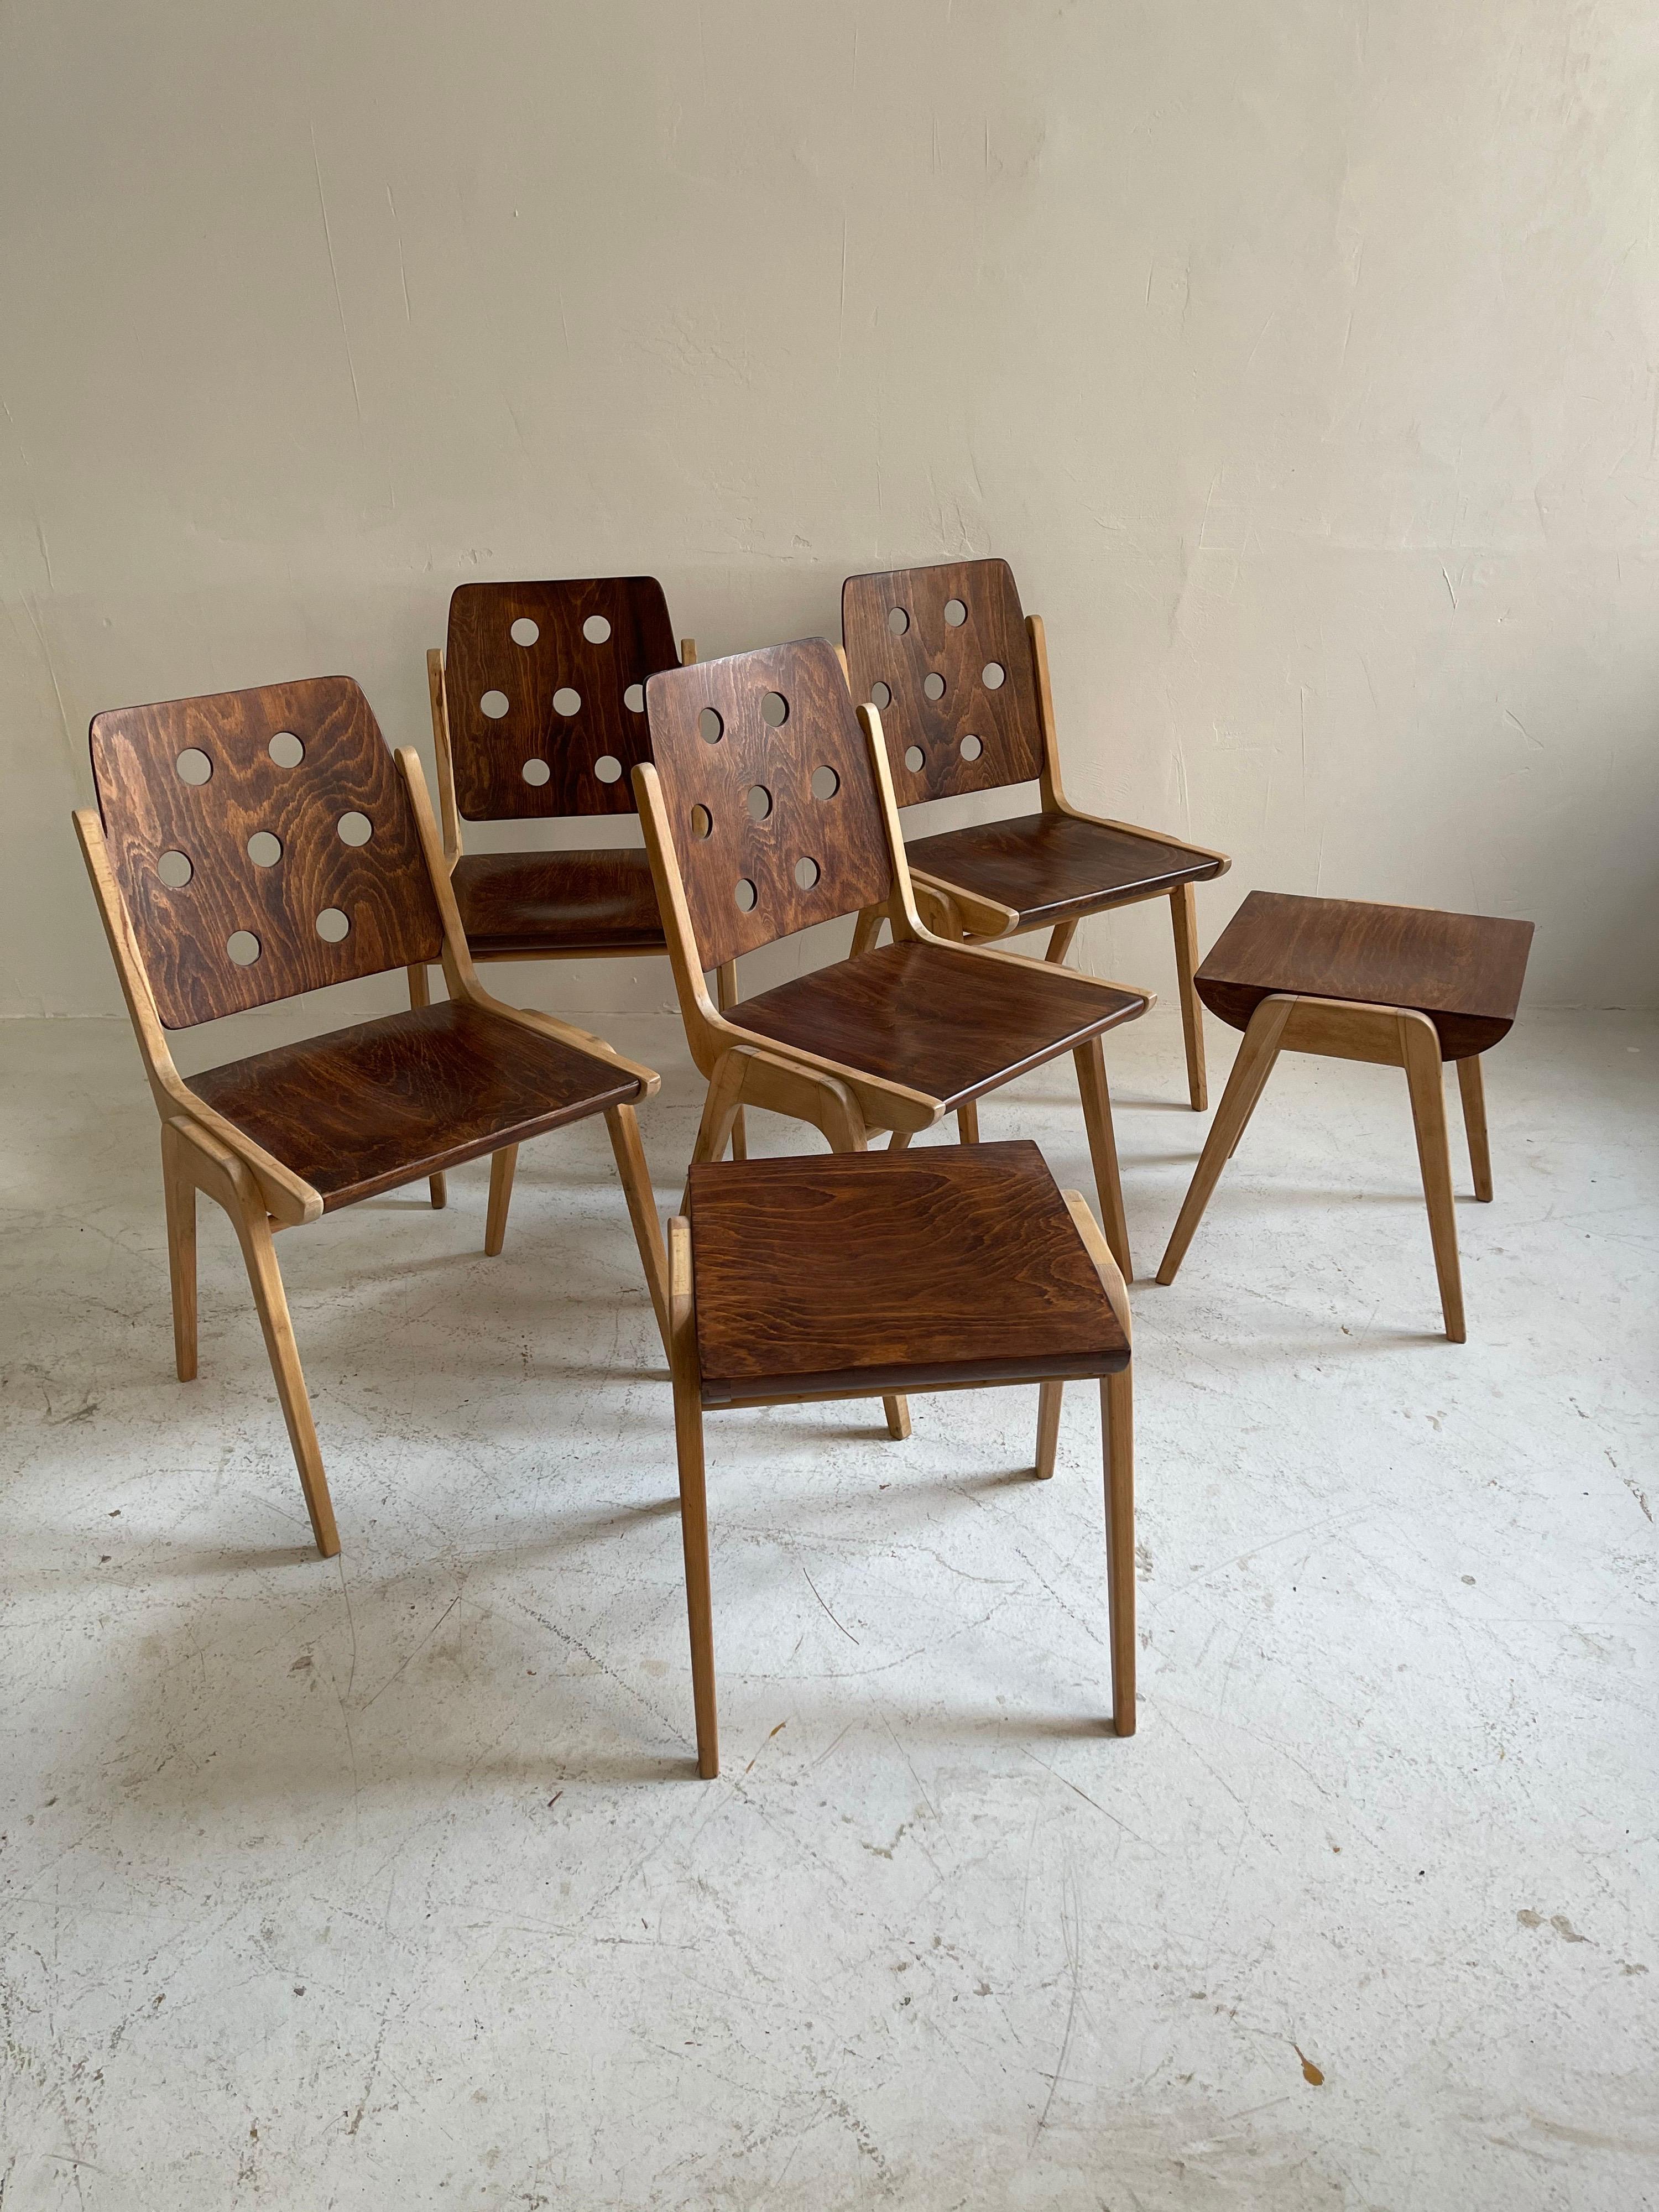 Mid-20th Century Franz Schuster Model 'Maestro' Dining Room Chairs & Stools, Austria, 1950s For Sale